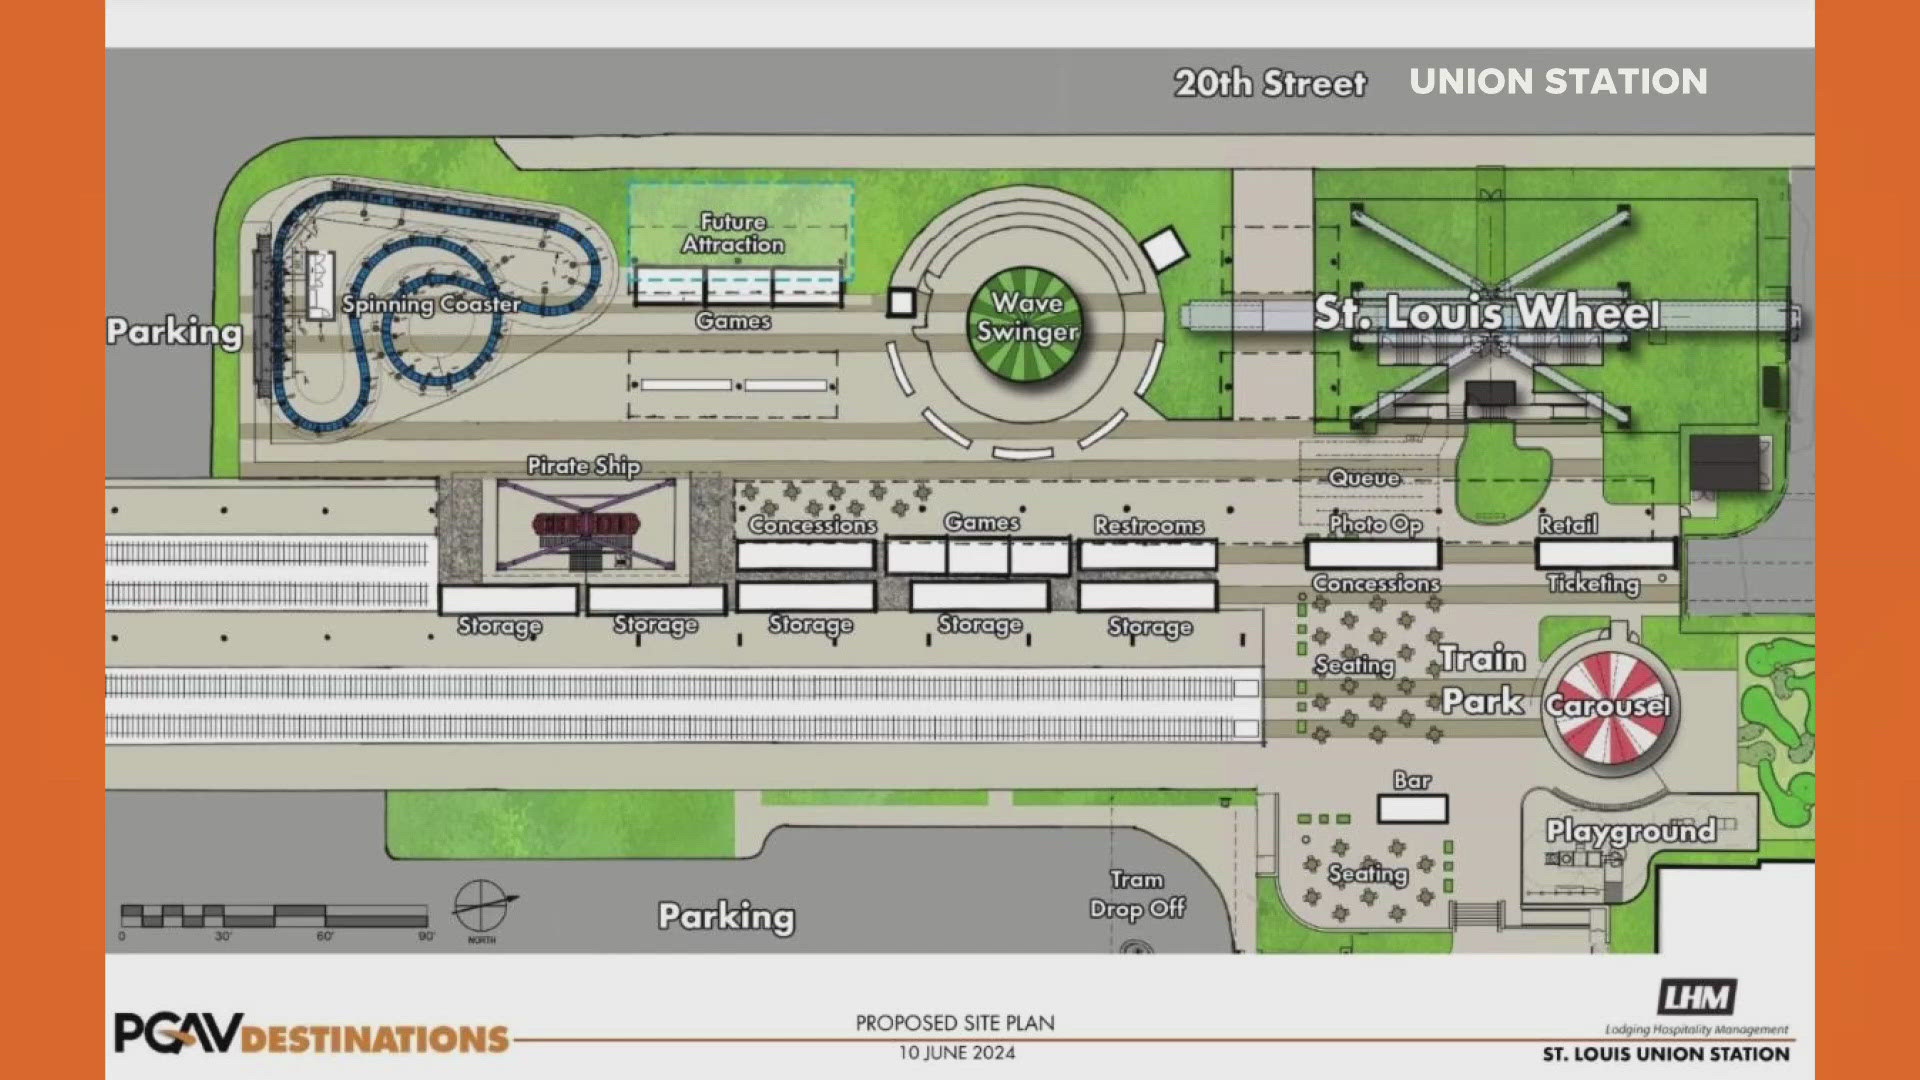 New attractions announced for Union Station. New rides will open next year, including a spinning coaster with a train theme, carnival games and more.